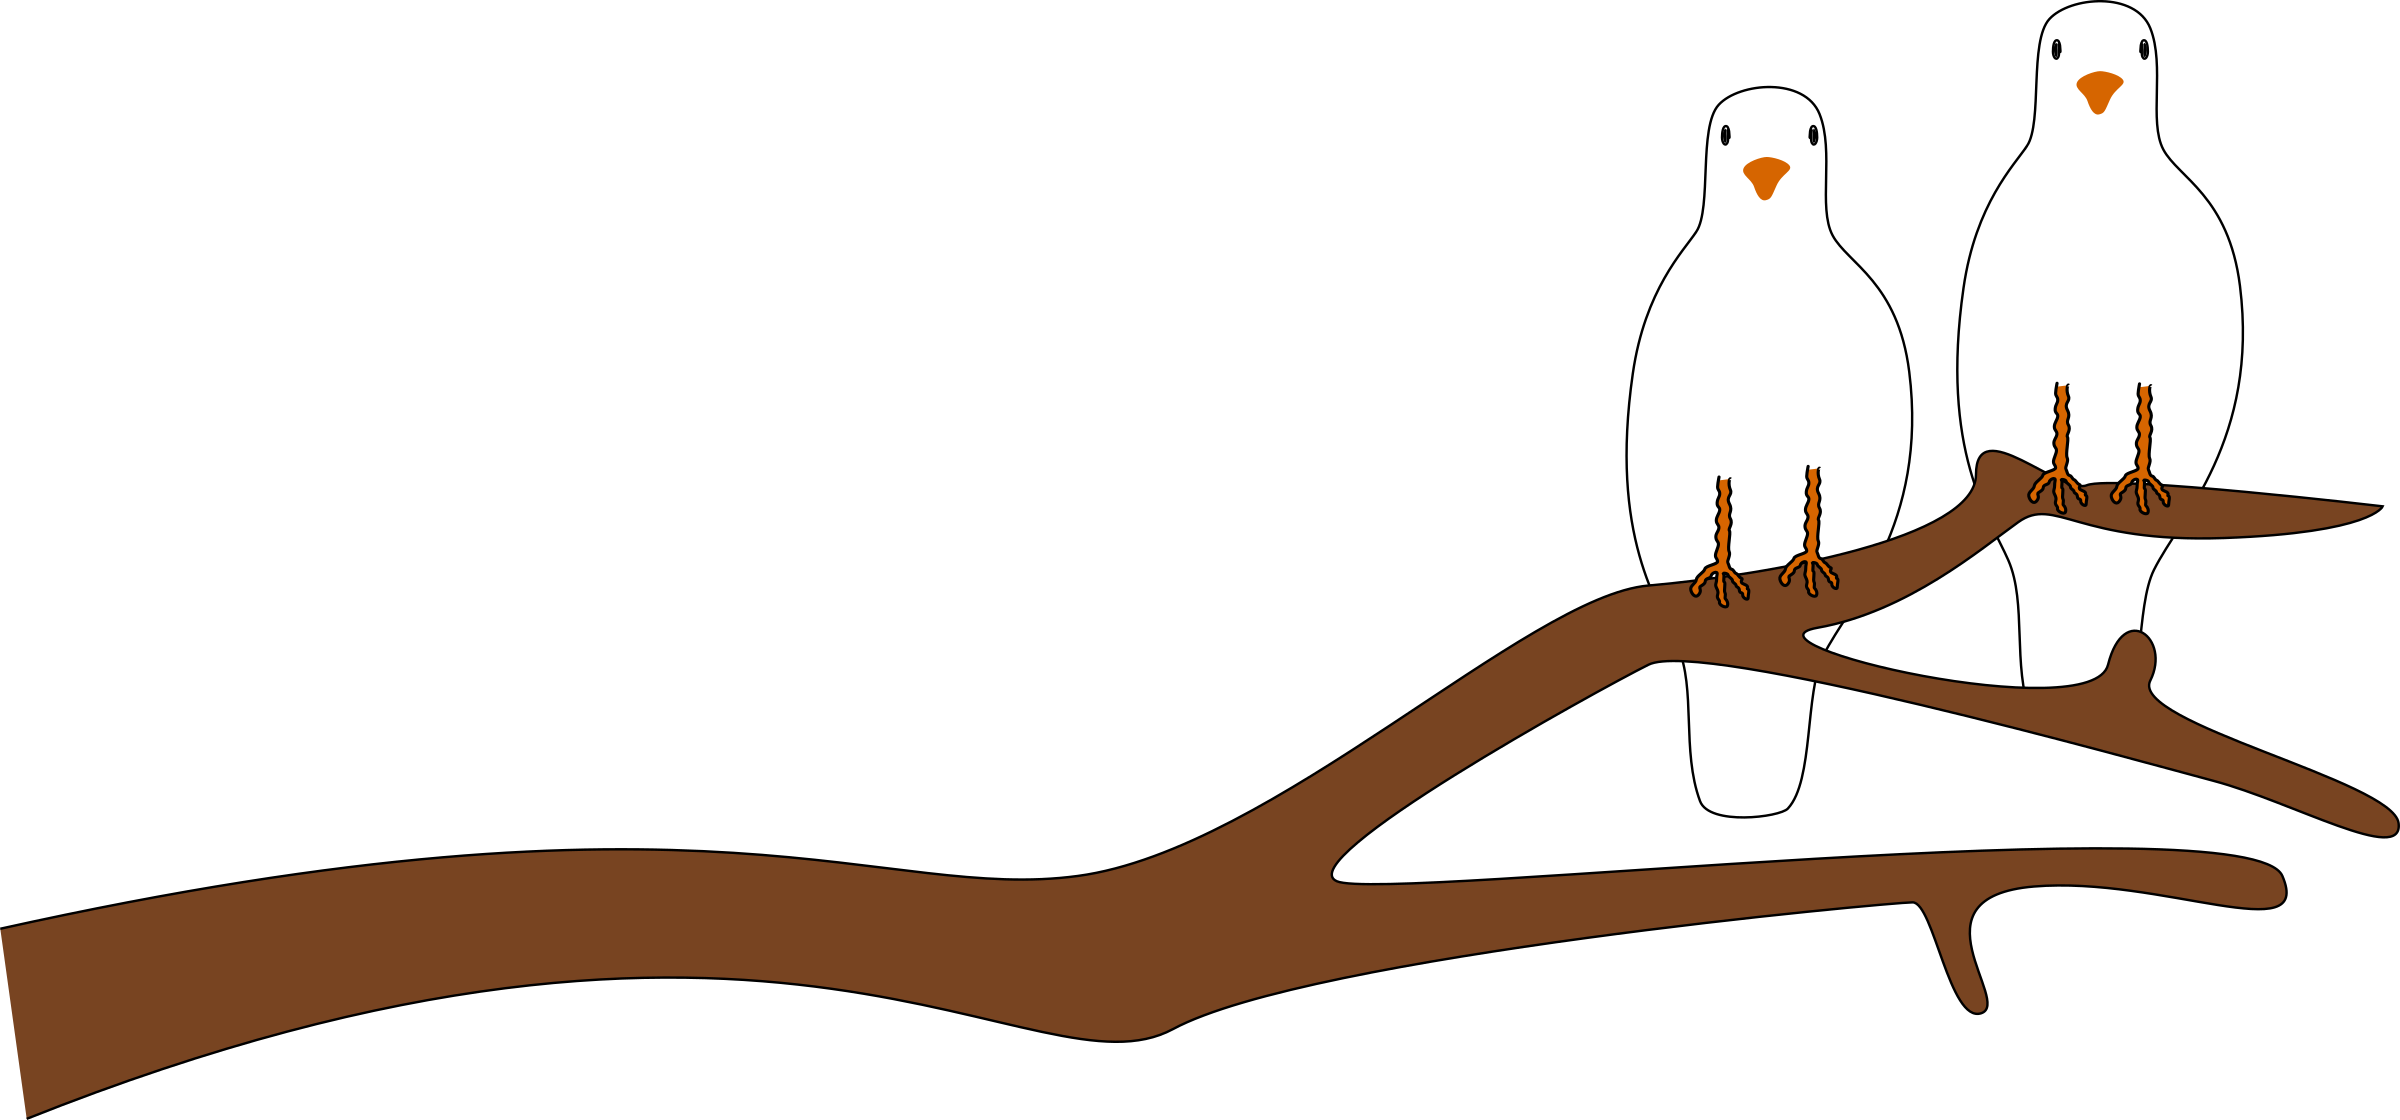 Doves on a Branch for V Day Icons PNG - Free PNG and Icons Downloads